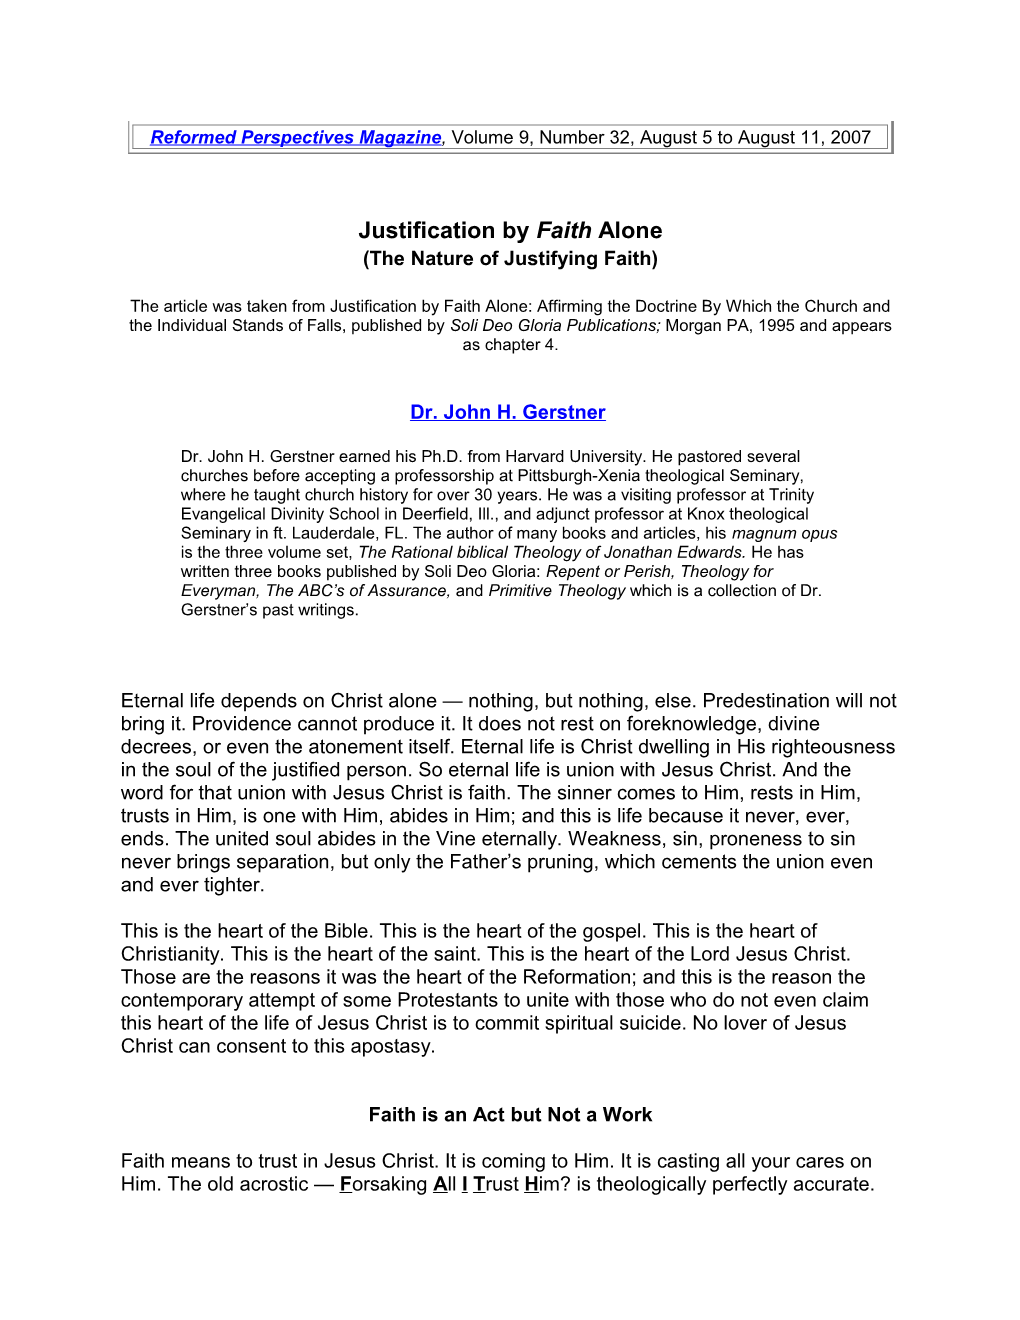 Justification by Faith Alone (The Nature of Justifying Faith)